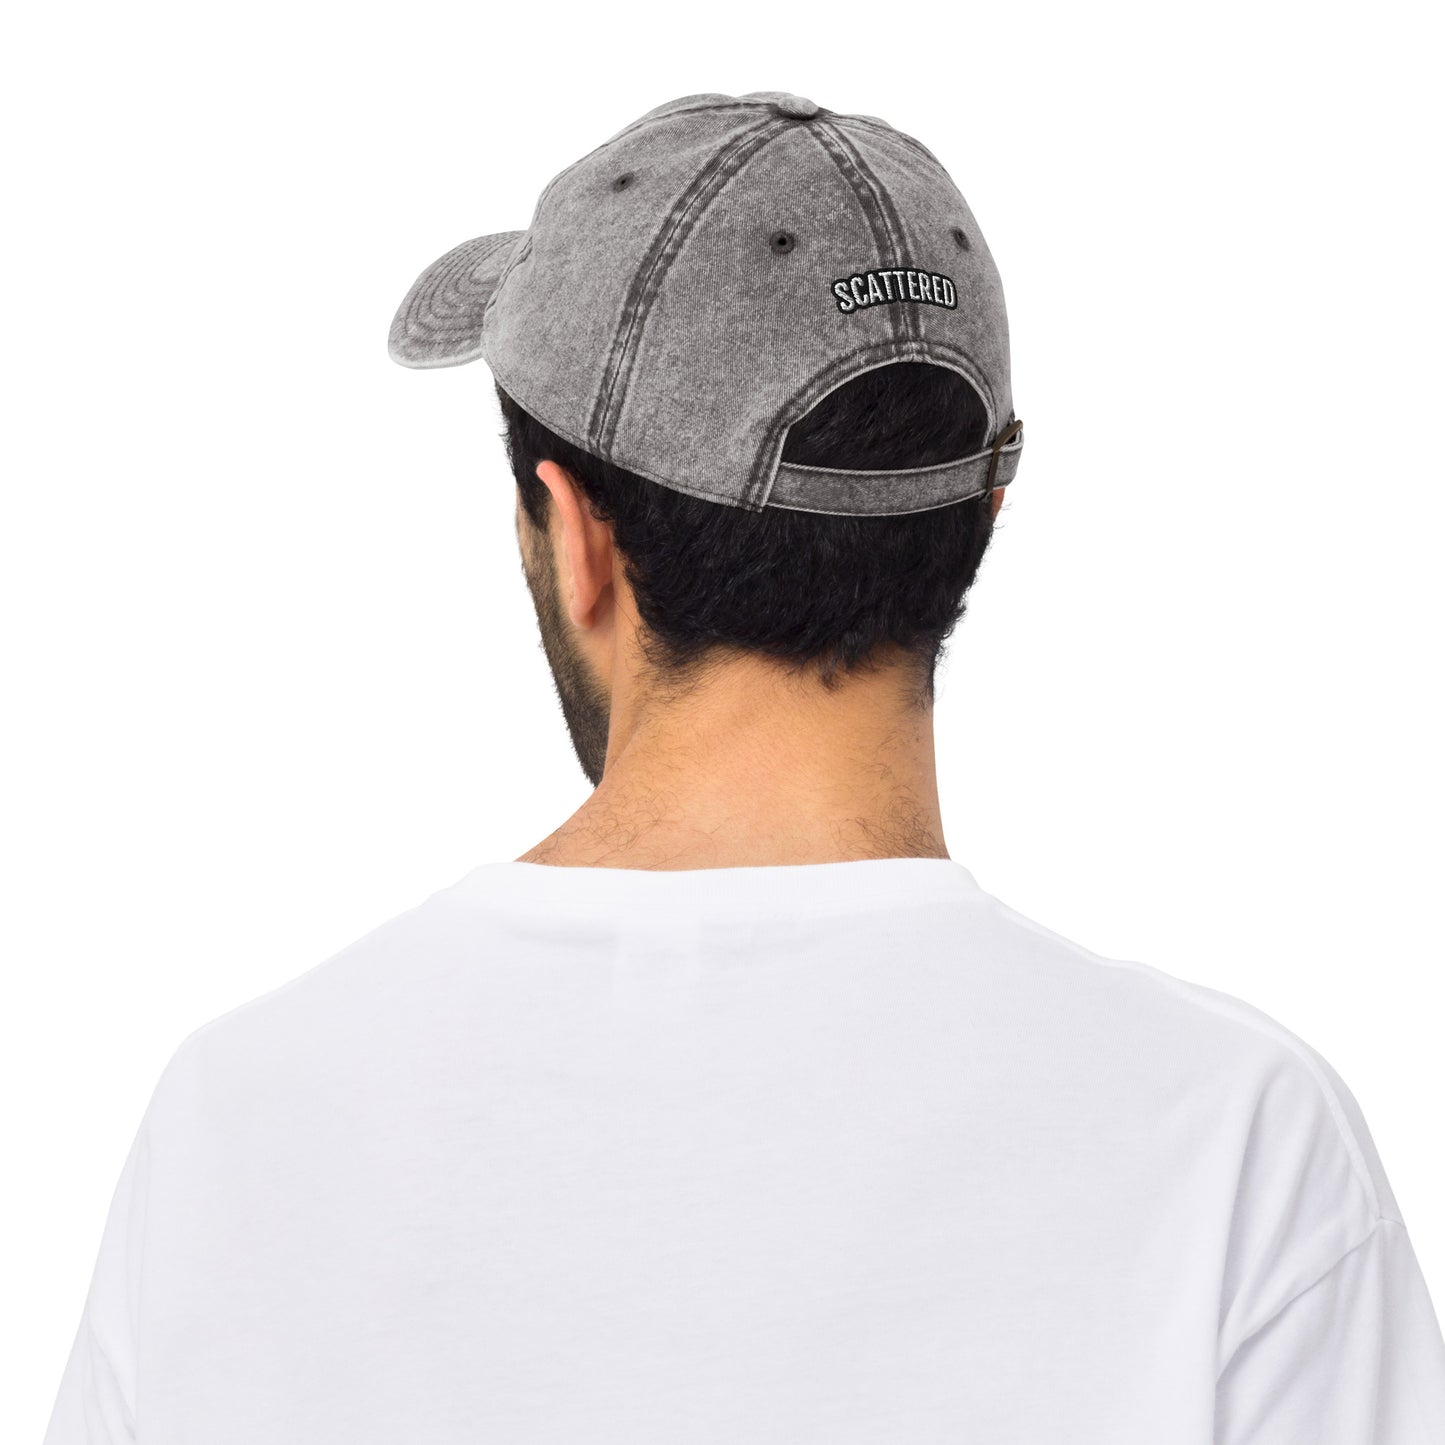 New York Apple Logo Embroidered Grey Vintage Cotton Twill Hat Scattered Streetwear